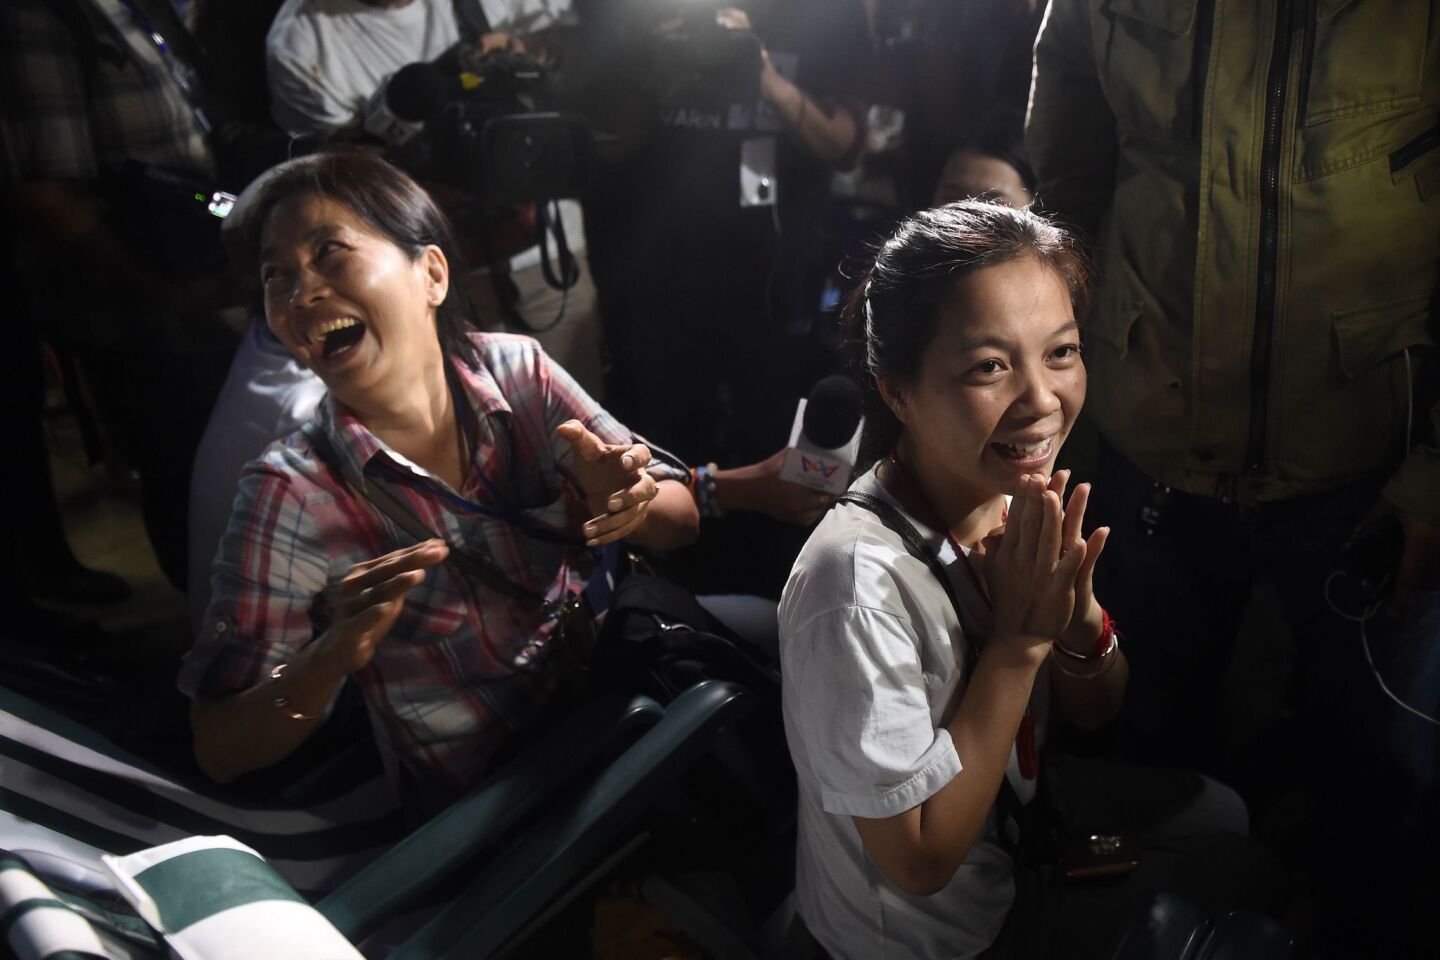 Relatives celebrate while camping out near Tham Luang Nang Non cave following news that the boys and their coach were found.